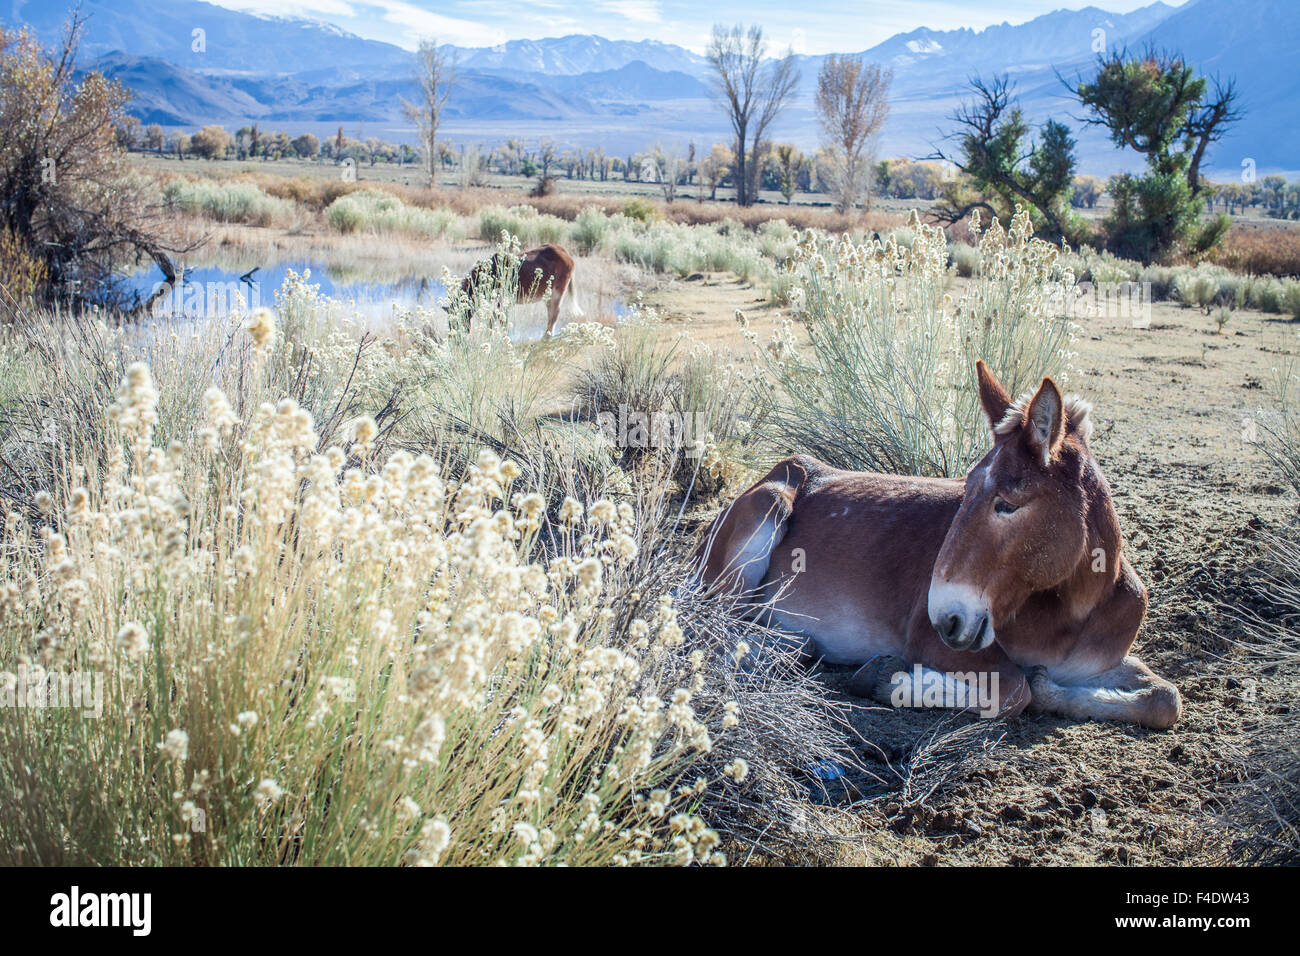 Horses in a field in the High Sierra. Stock Photo